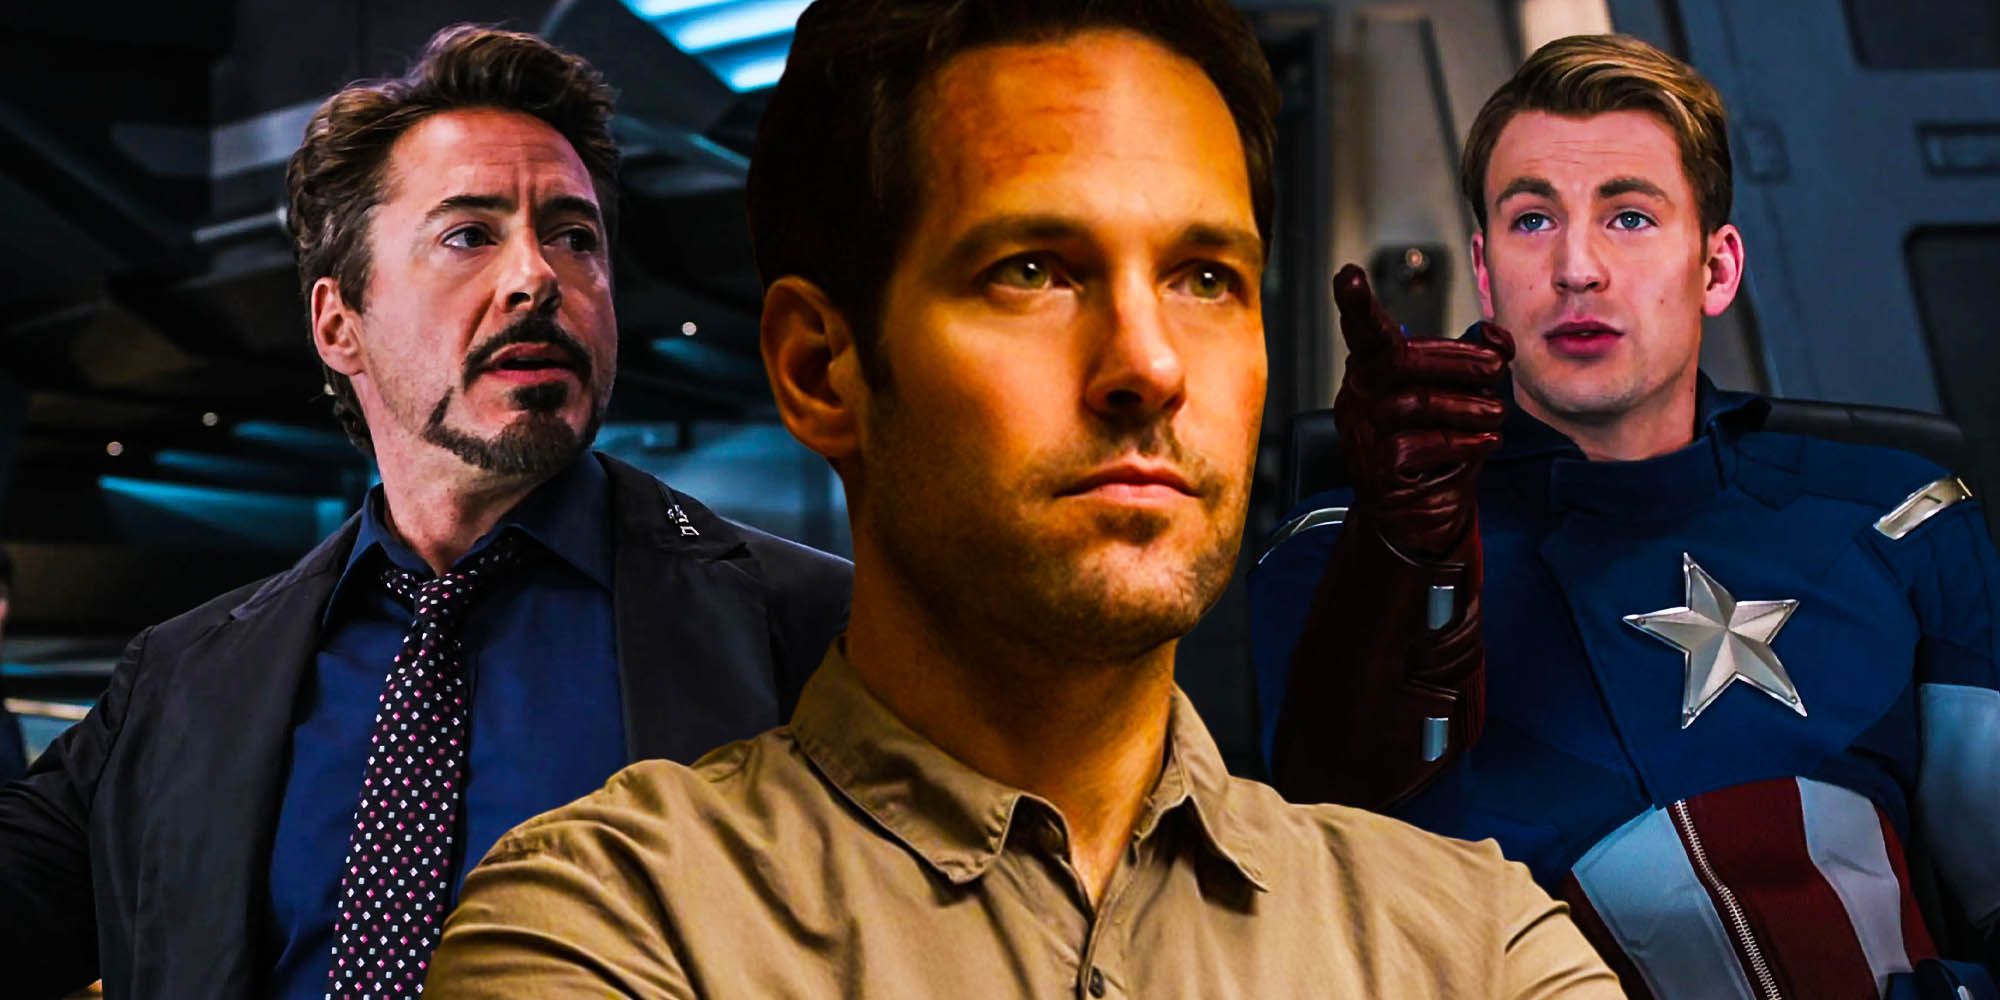 Antman Iron man Captain America MCU Comedy makes tragedy meaningful